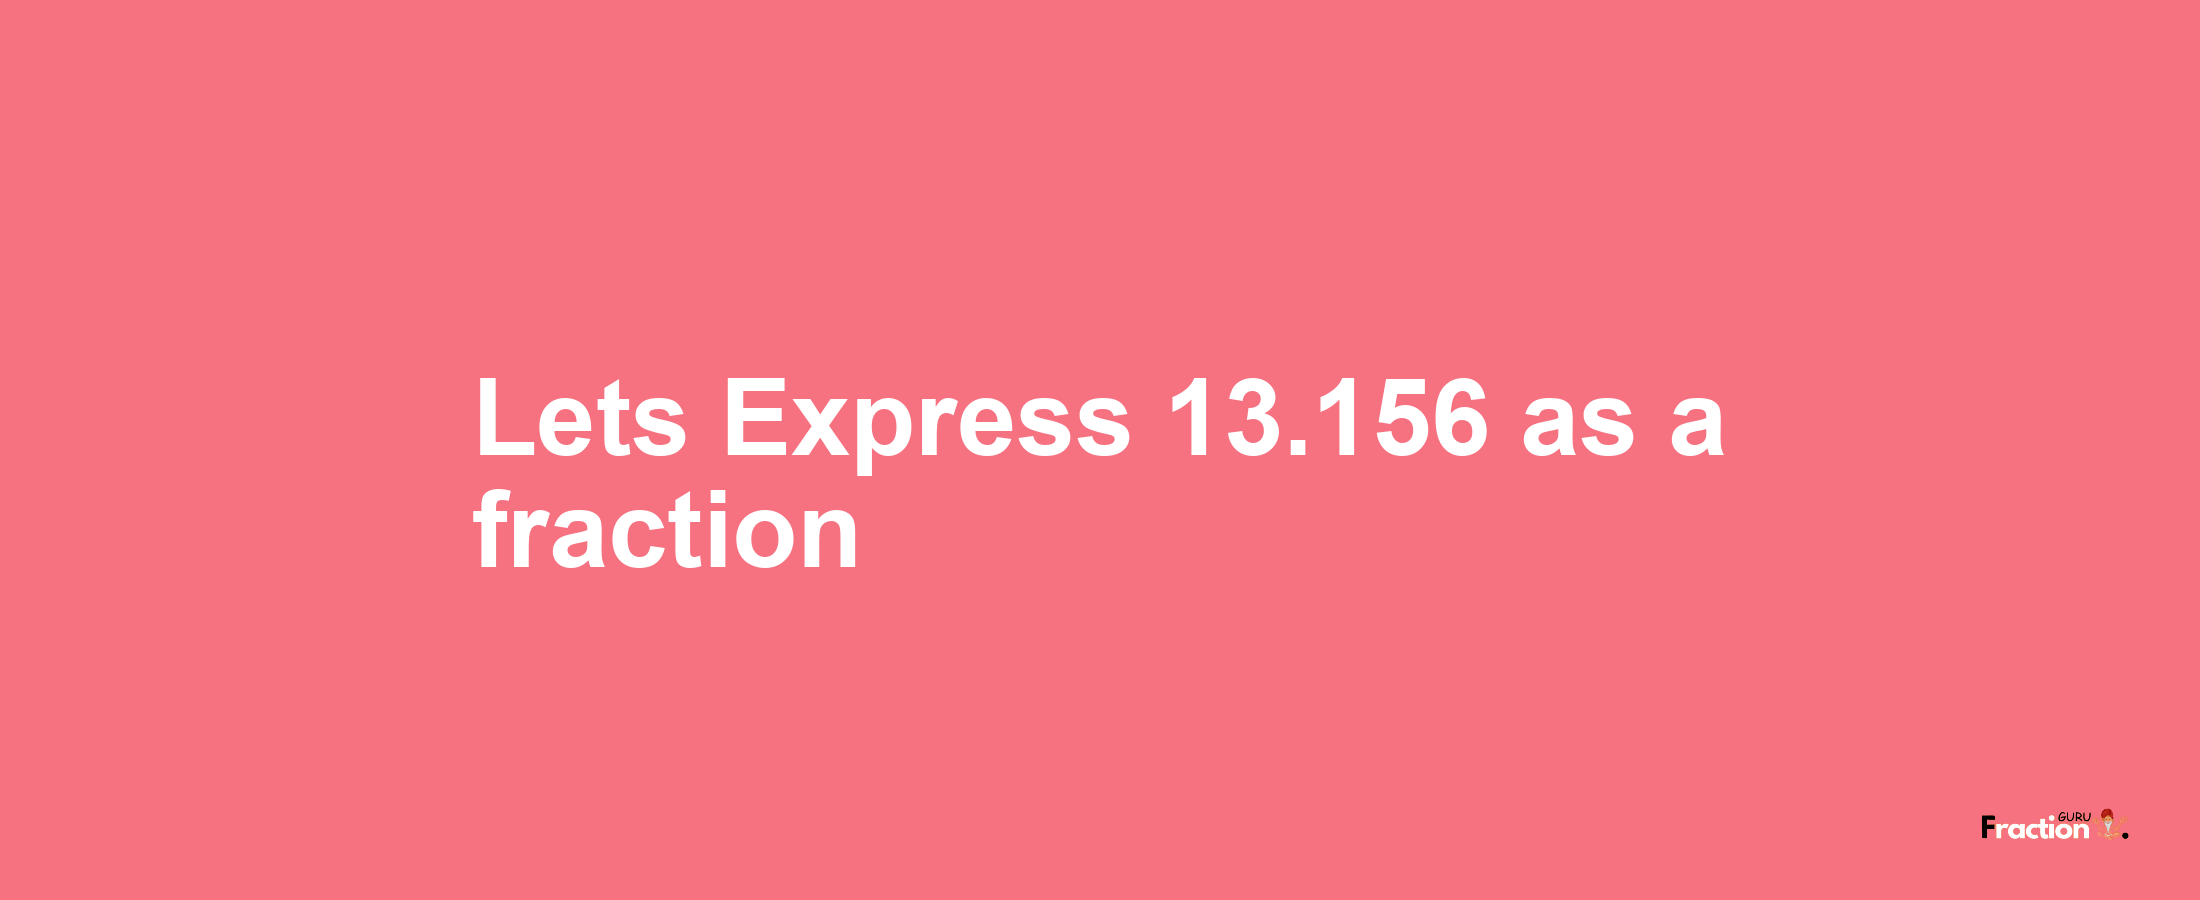 Lets Express 13.156 as afraction